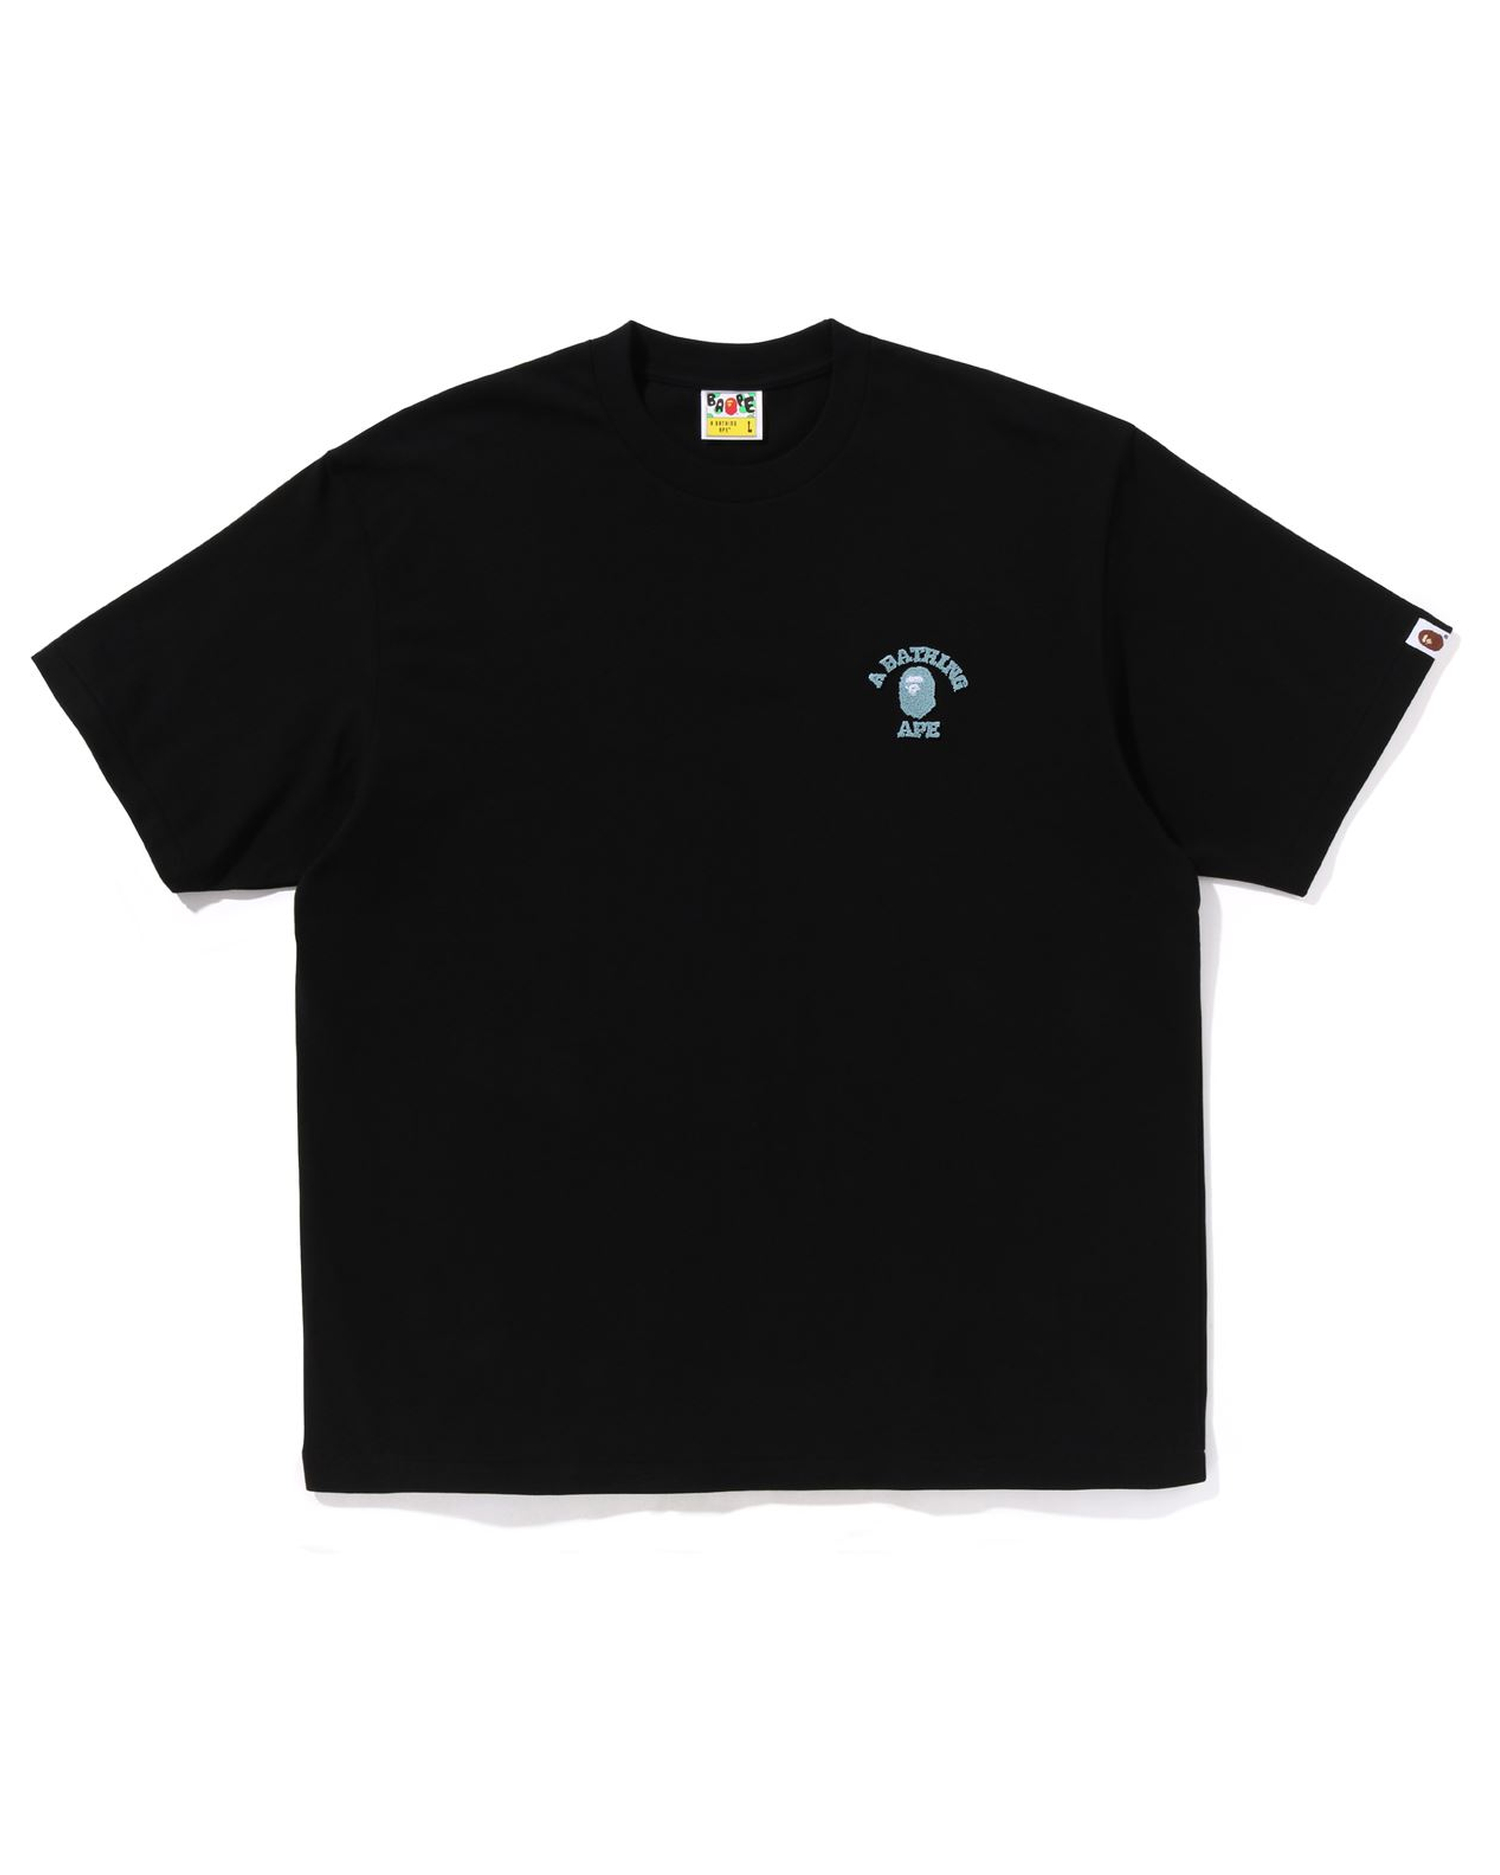 Shop College One Point Relaxed Fit Tee Online | BAPE